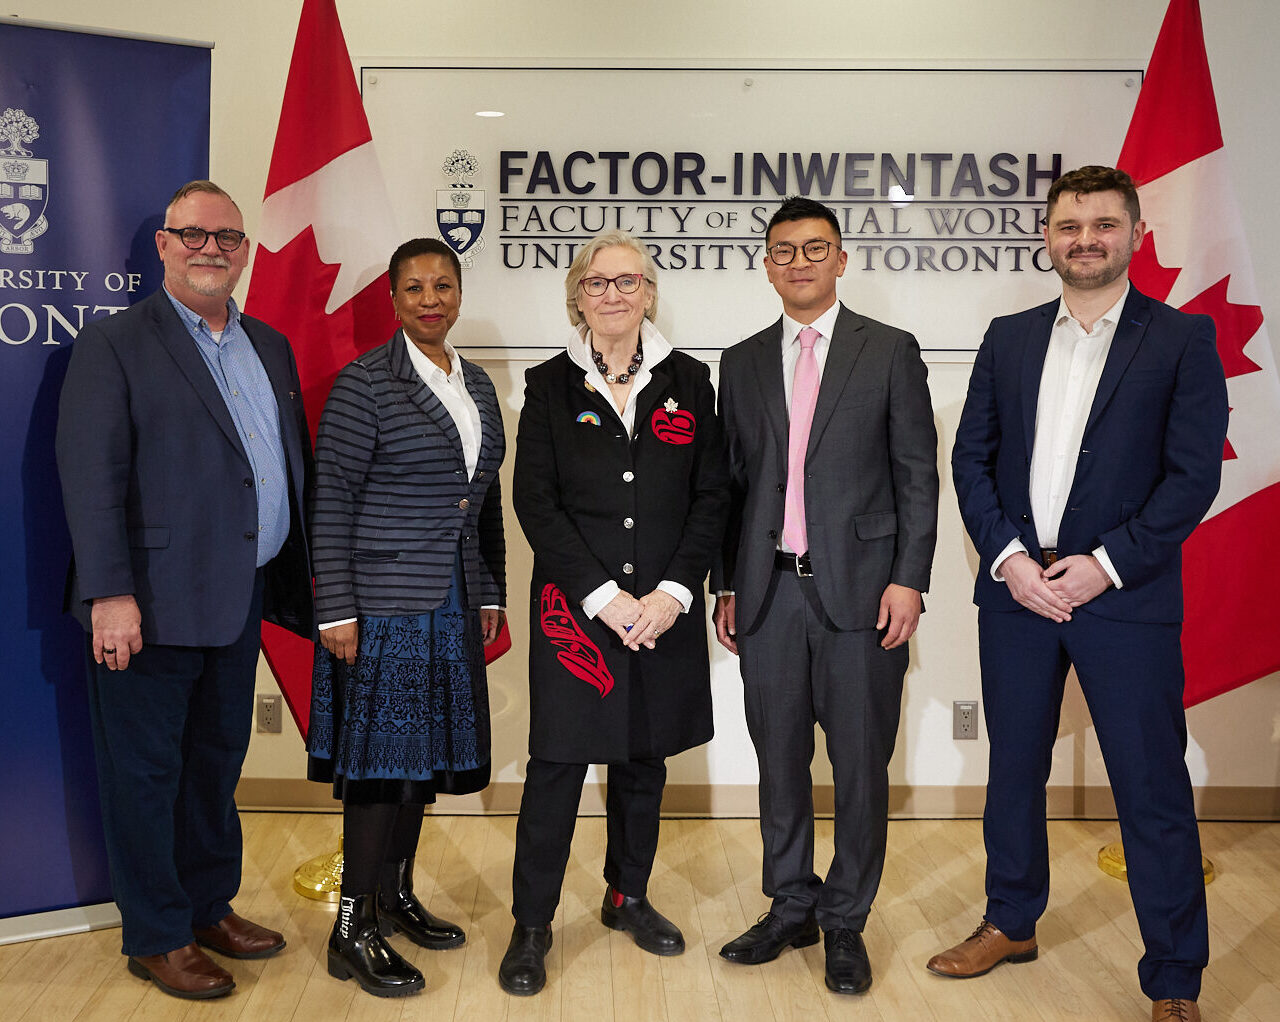 Group photo of Professor David Brennan, Dean Charmaine Williams, the Honourable Carolyn Bennett, Minister of Mental Health and Addictions and Associate Minister of Health, Michael Kwag, Director, CBRC, and Jack Lawrence, participant in the Investigaytors program. Posed in front of FIFSW's logo, flanked by Canadian flags. U of T banner to the left.